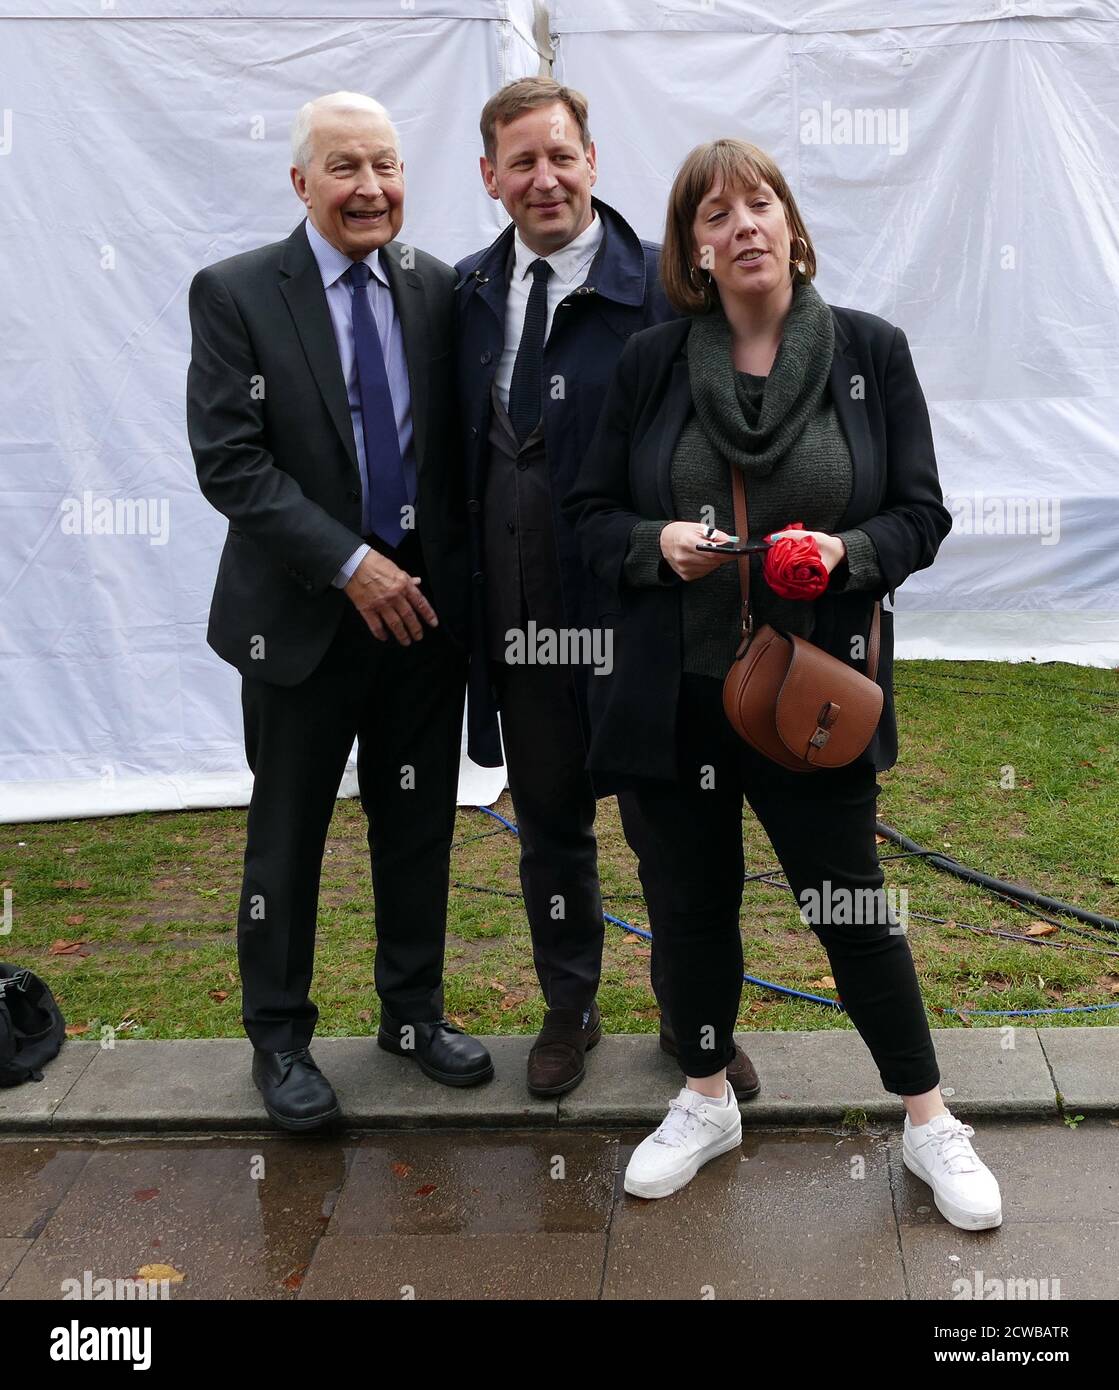 Frank Field, Chris Leslie and Jess Phillips arrive for media interviews after returning to parliament after the prorogation was annulled by the Supreme Court. 25th September 2019. . Jess Phillips (born 1981), British Labour Party politician, Member of Parliament since 2015. Frank Field (born 1942), British politician who has been the Member of Parliament (MP) for Birkenhead since 1979, serving as a Labour Party MP until August 2018 and thereafter as an Independent. Chris Leslie (born 1972) British politician and Member of Parliament (MP) for Nottingham East since 2010. minister in the Departme Stock Photo